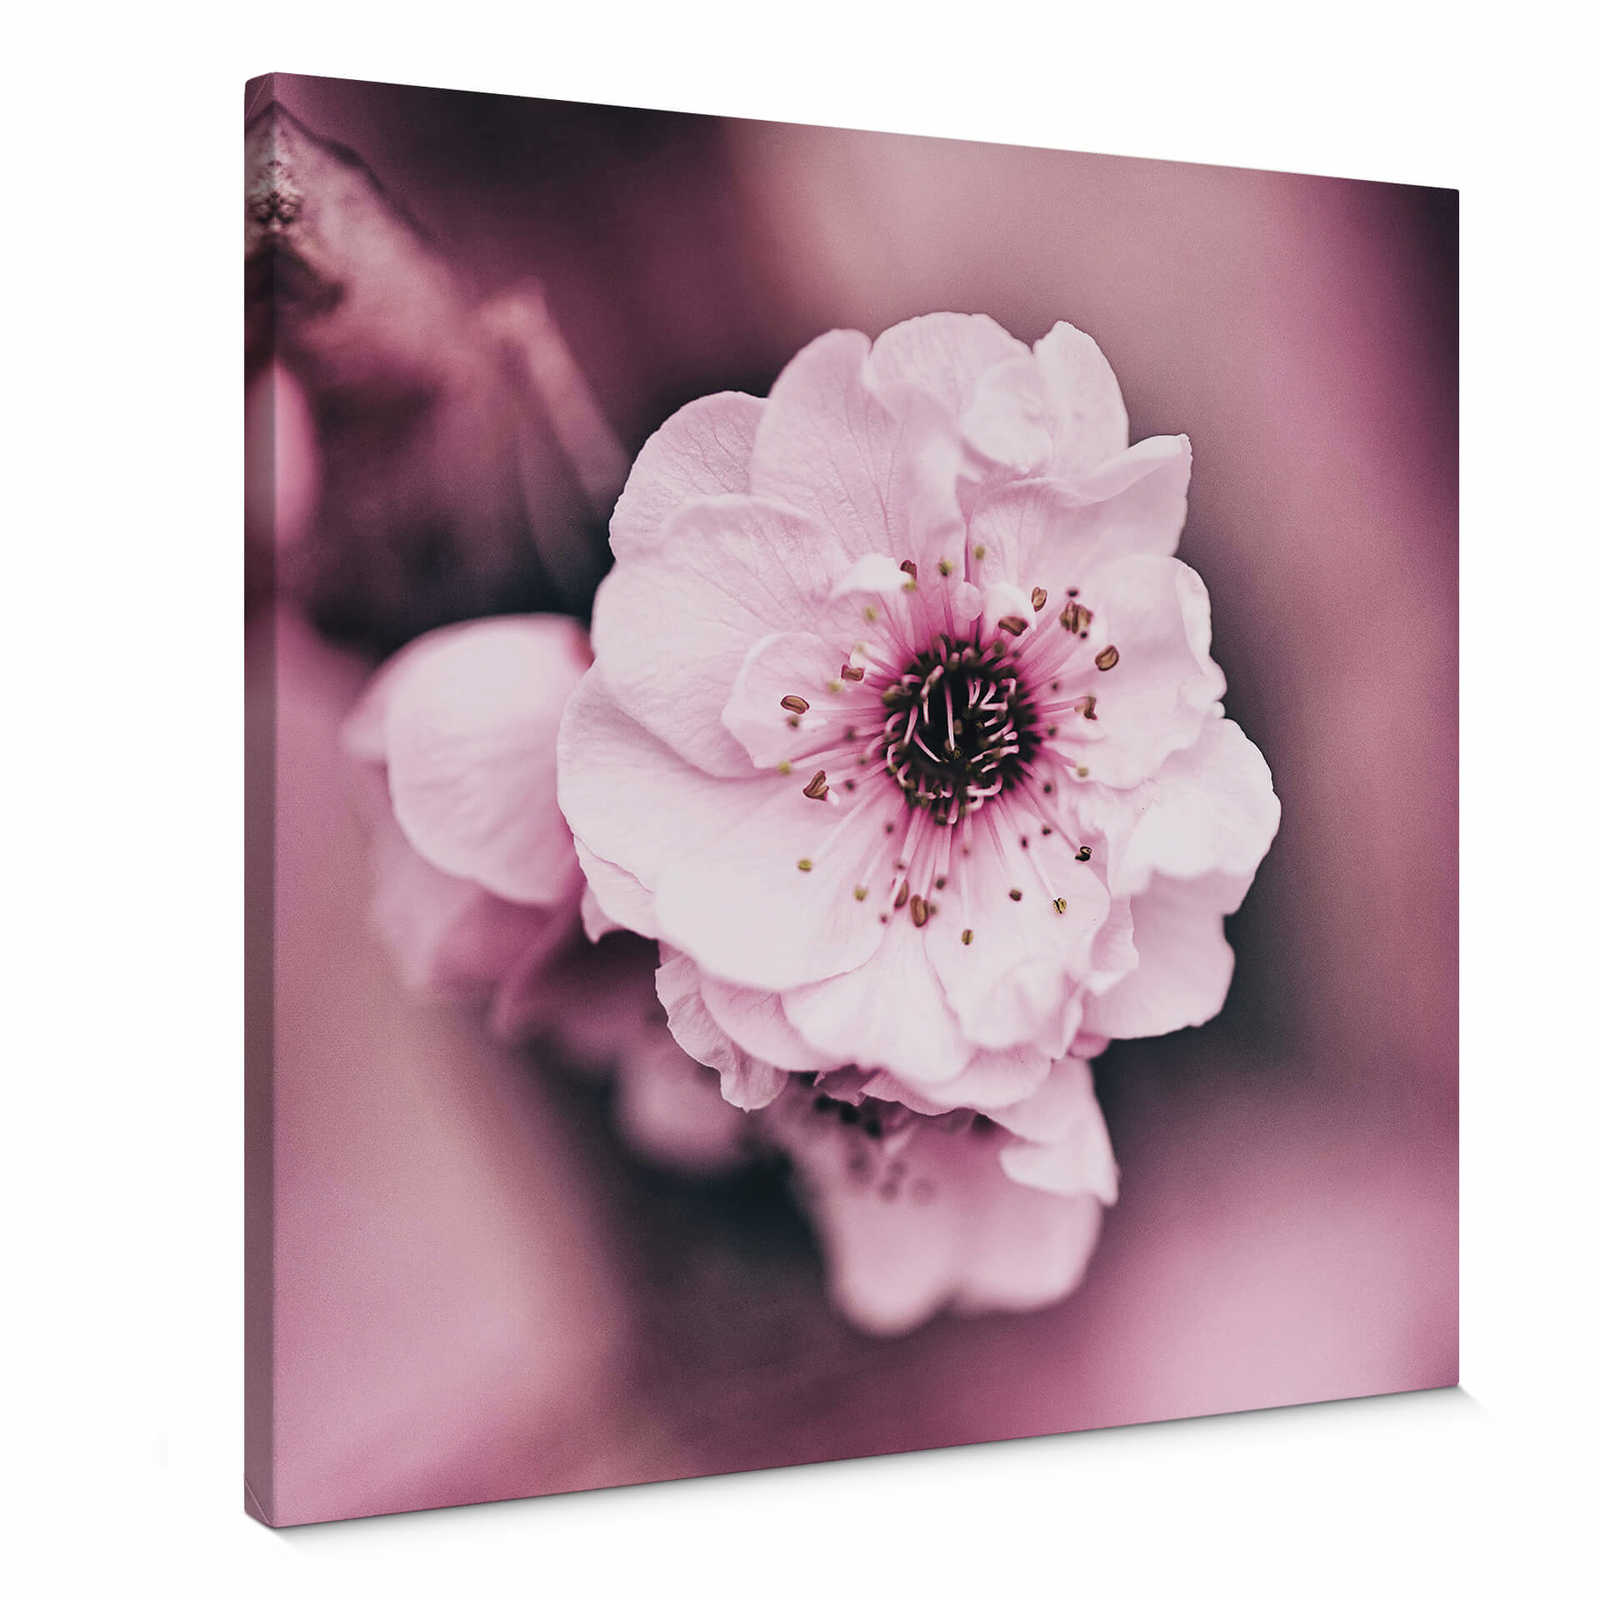         Flowers canvas print pink blossoms detail view
    